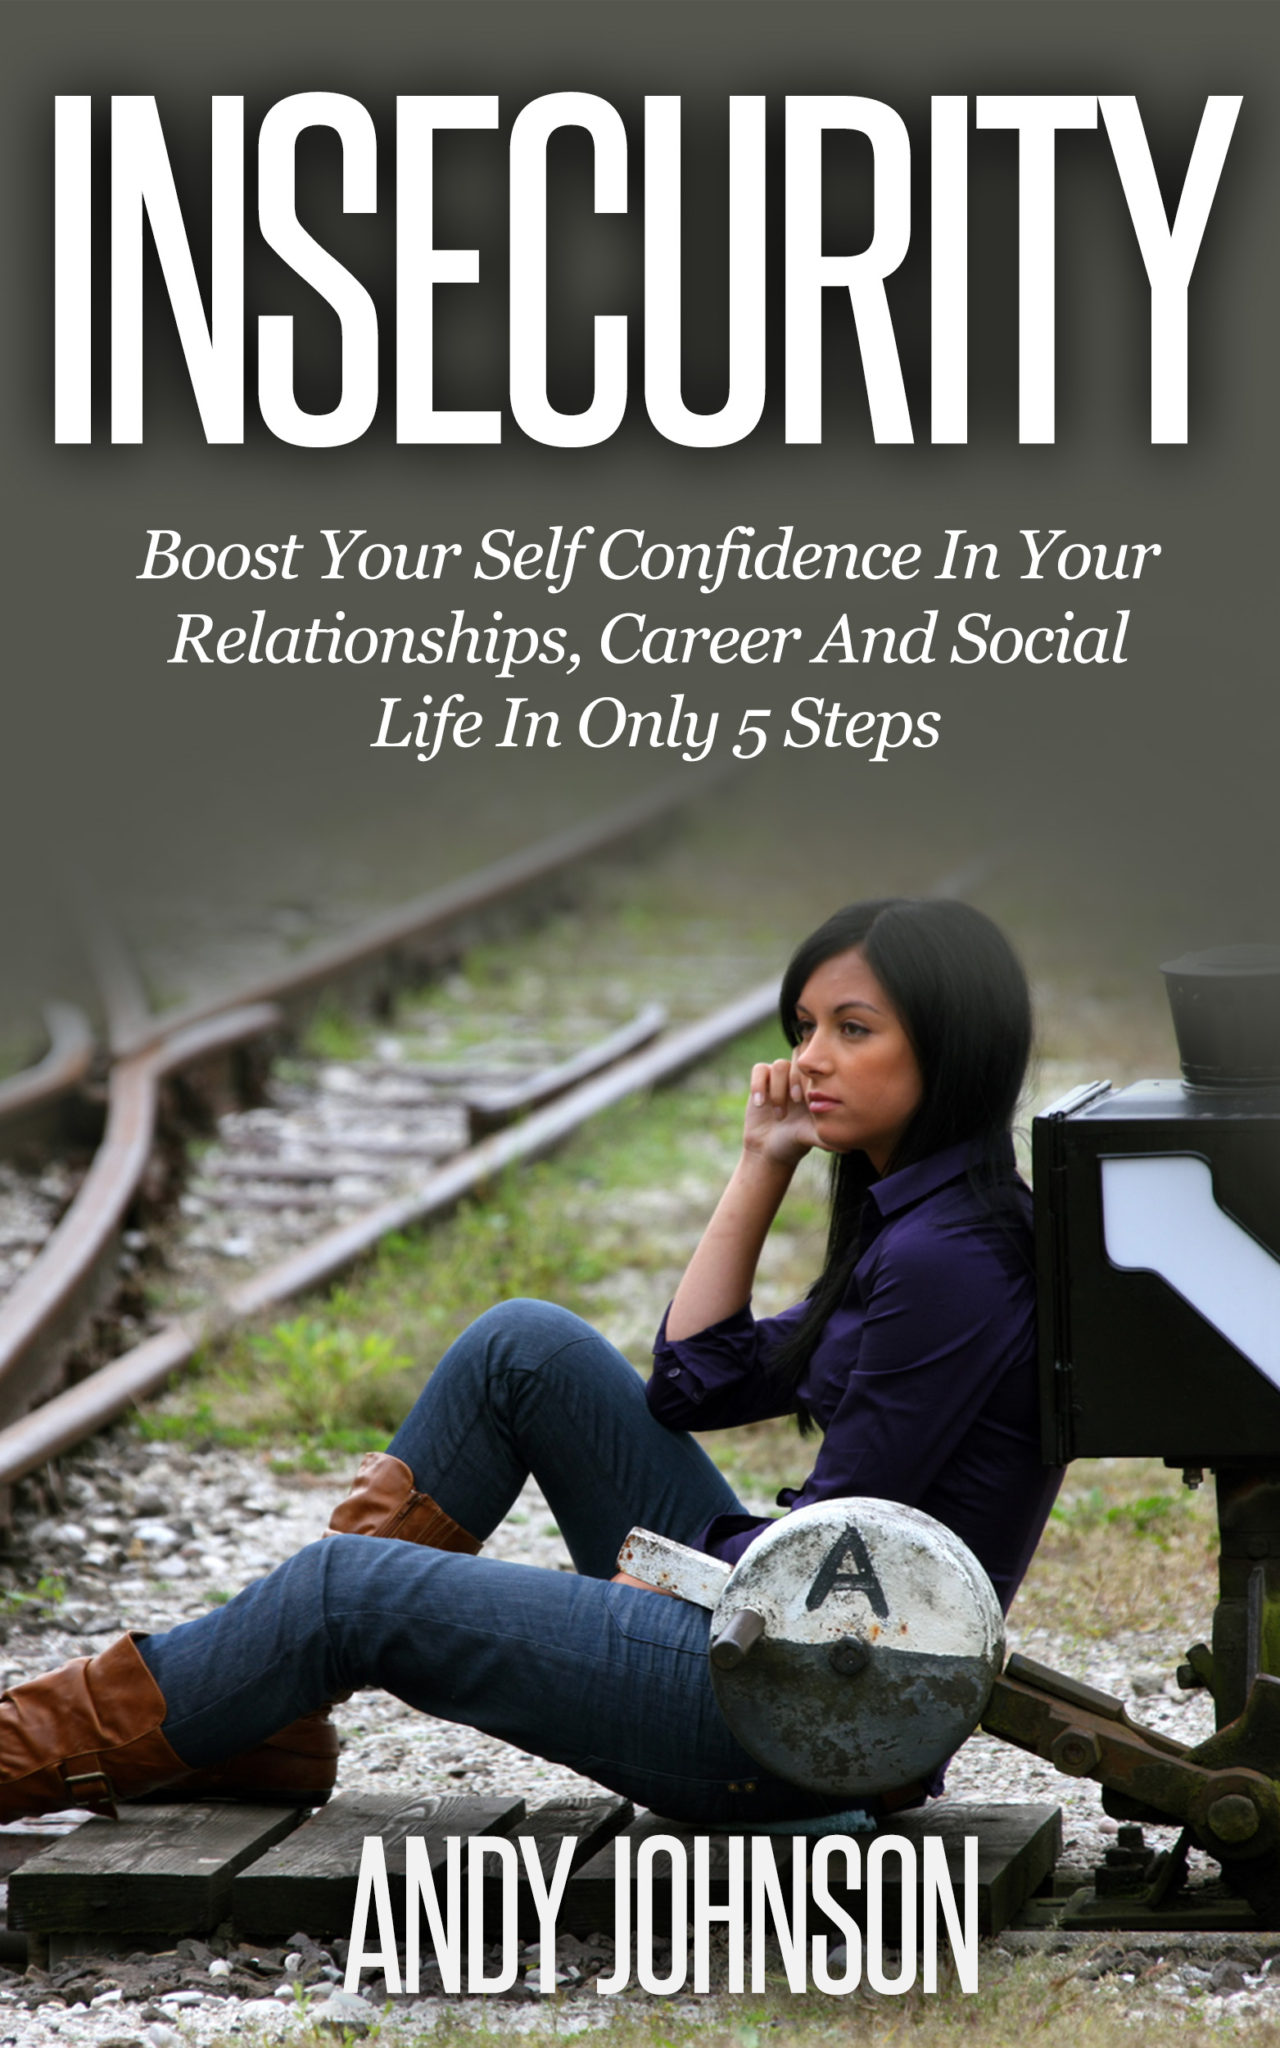 Insecurity: Boost Your Self-Confidence in Your Relationships, Career, and Social Life In Only 5 Steps by Andy Johnson